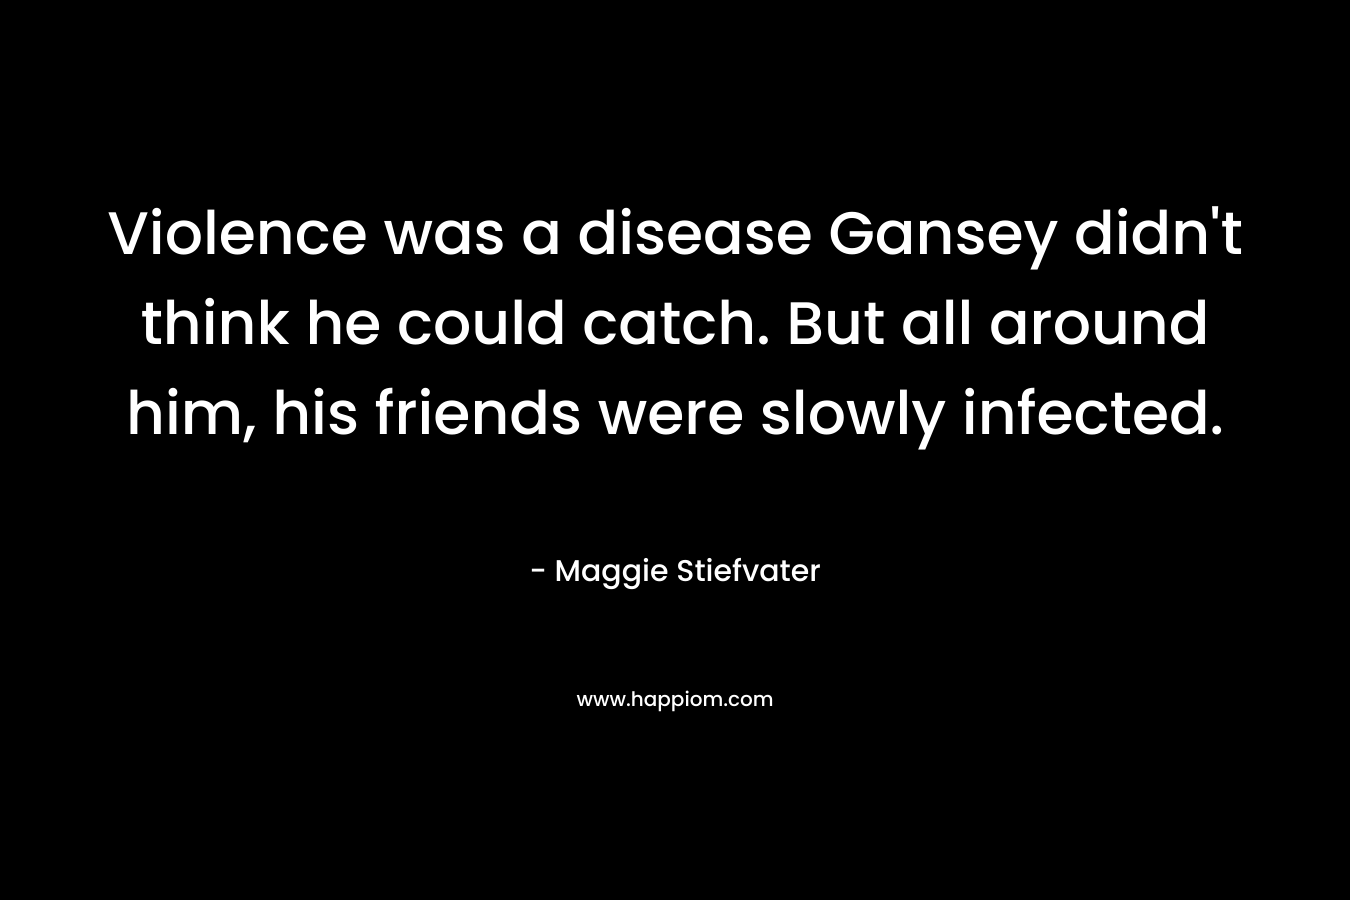 Violence was a disease Gansey didn't think he could catch. But all around him, his friends were slowly infected.